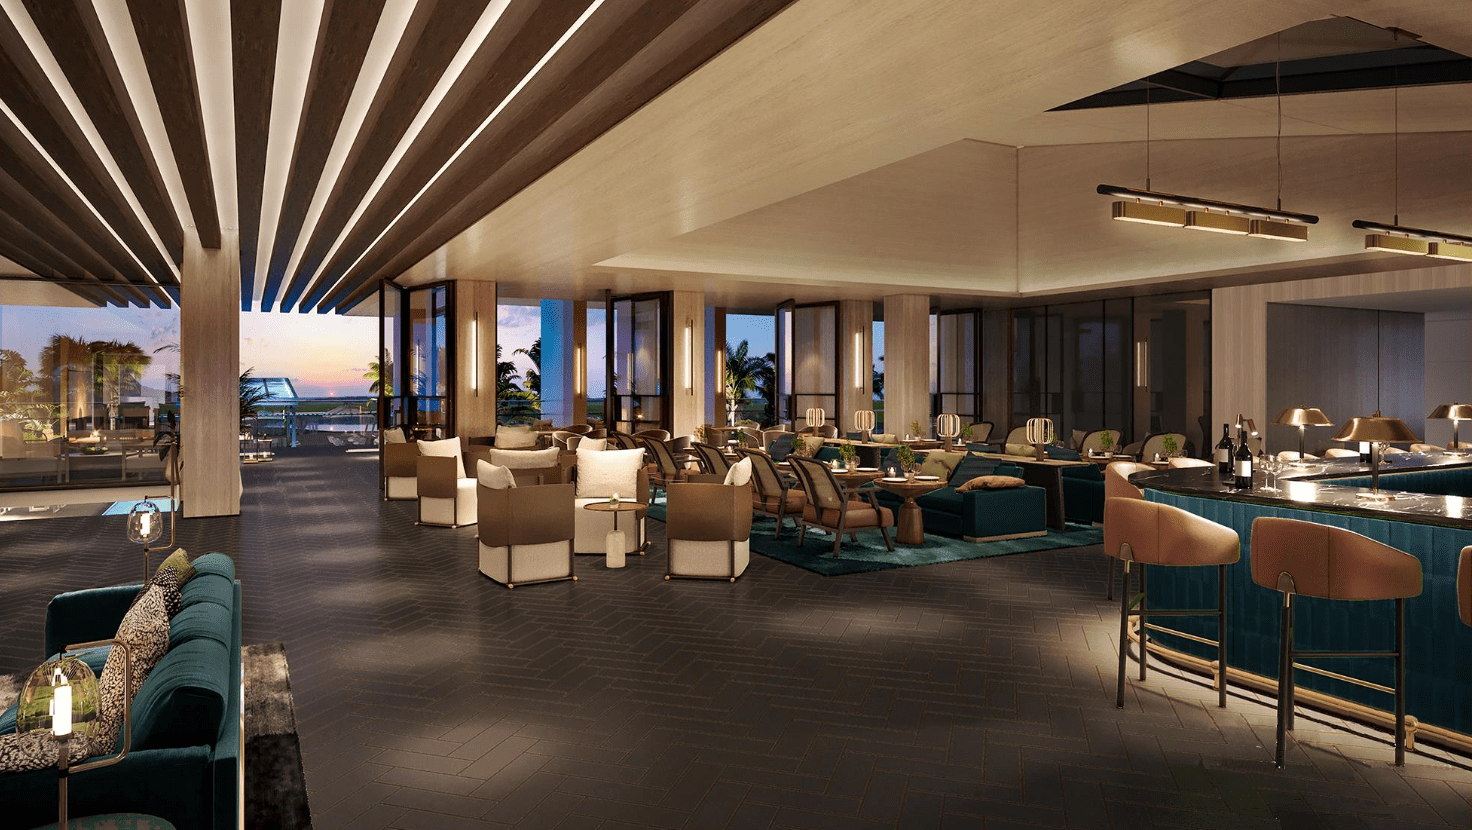 A rendering of the lounge of VEA Newport Beach. The floor, ceiling and chairs are earthtones, while couches and rugs are dark teal